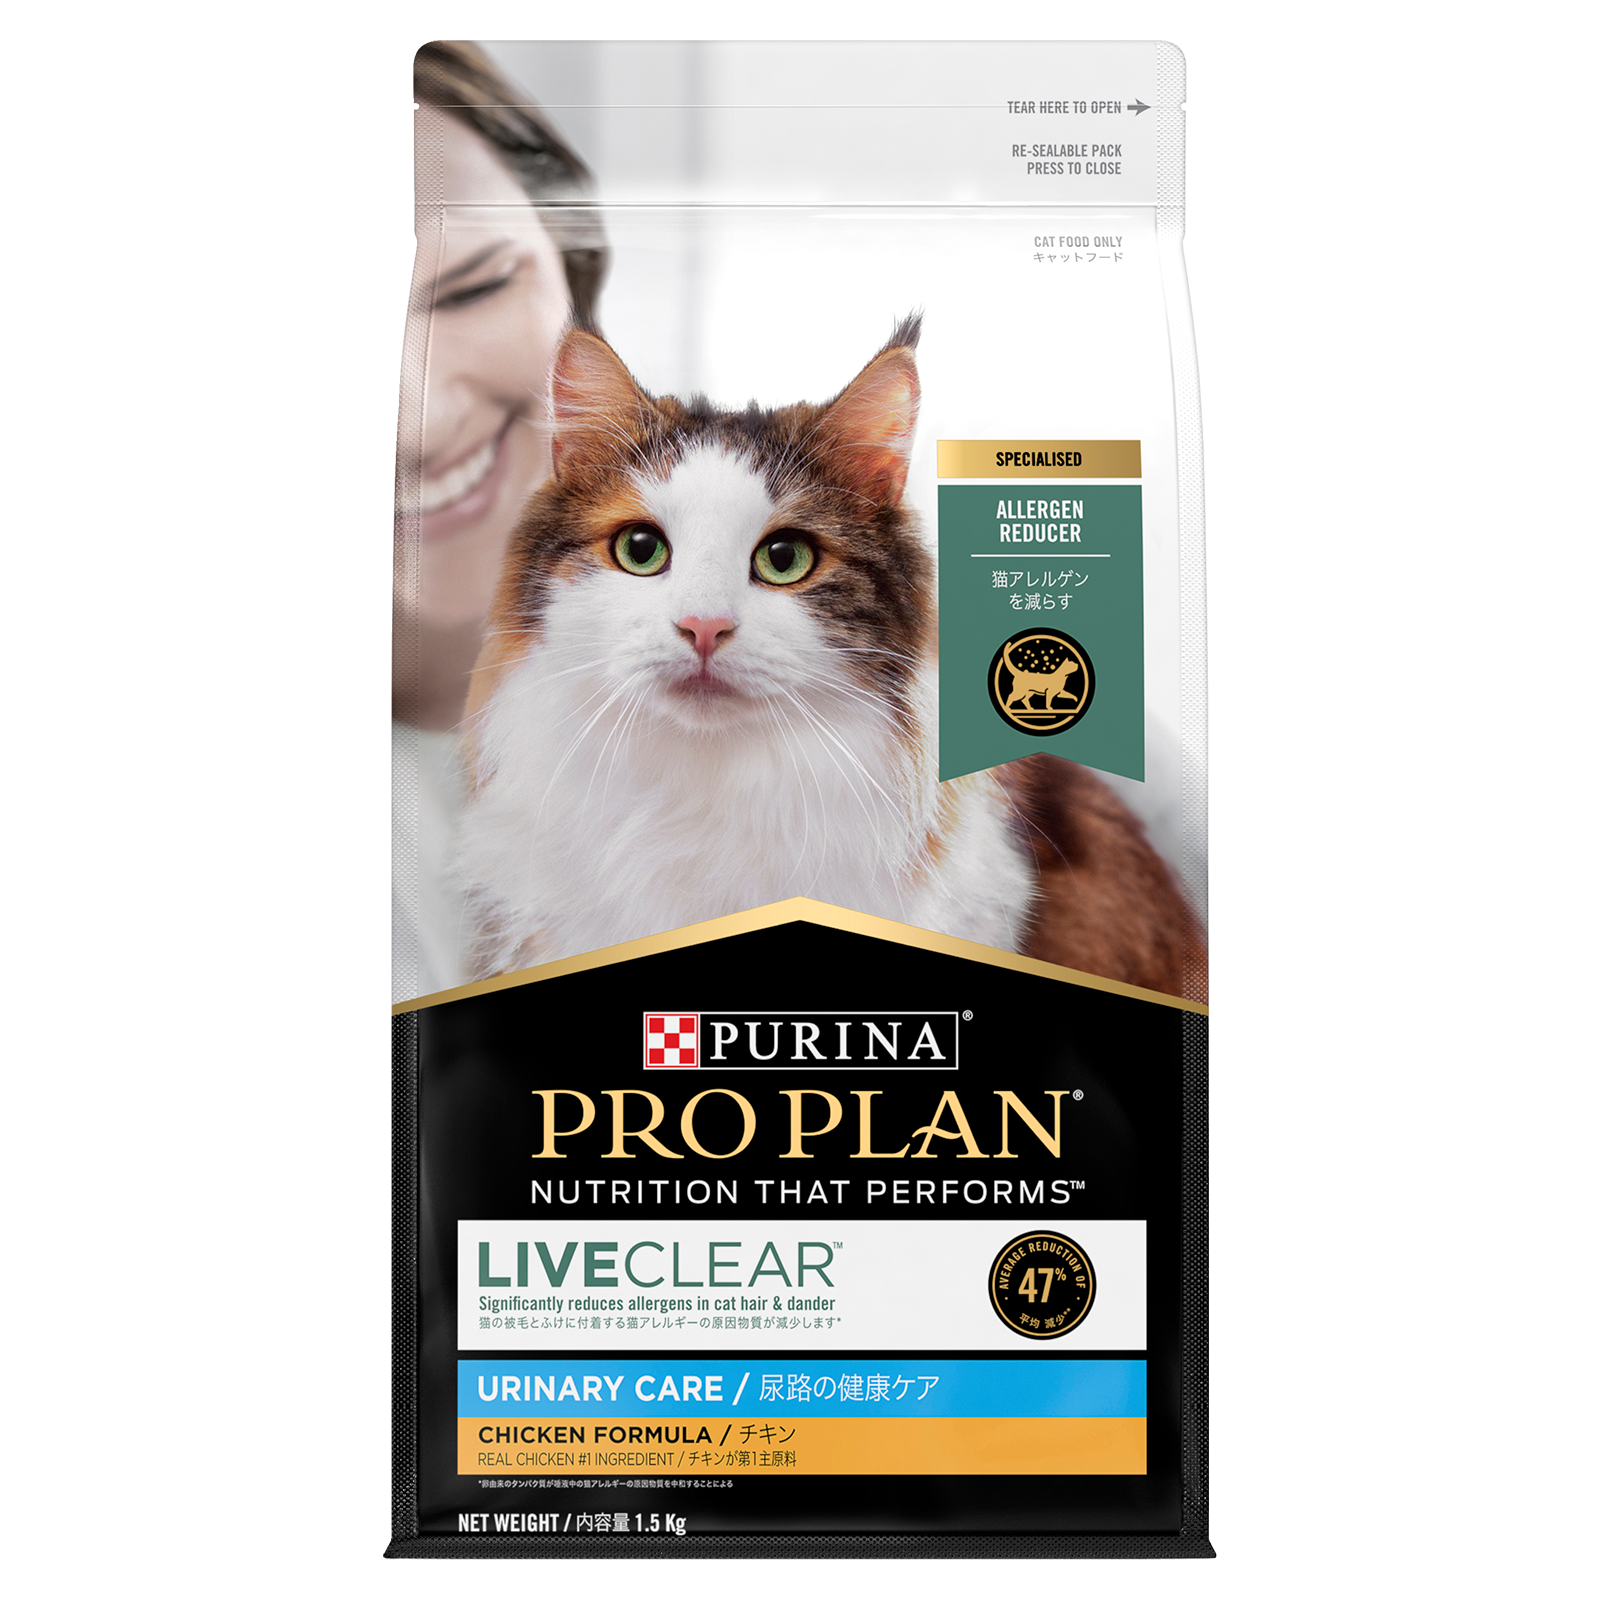 Pro Plan Cat Food LiveClear Adult Urinary Care